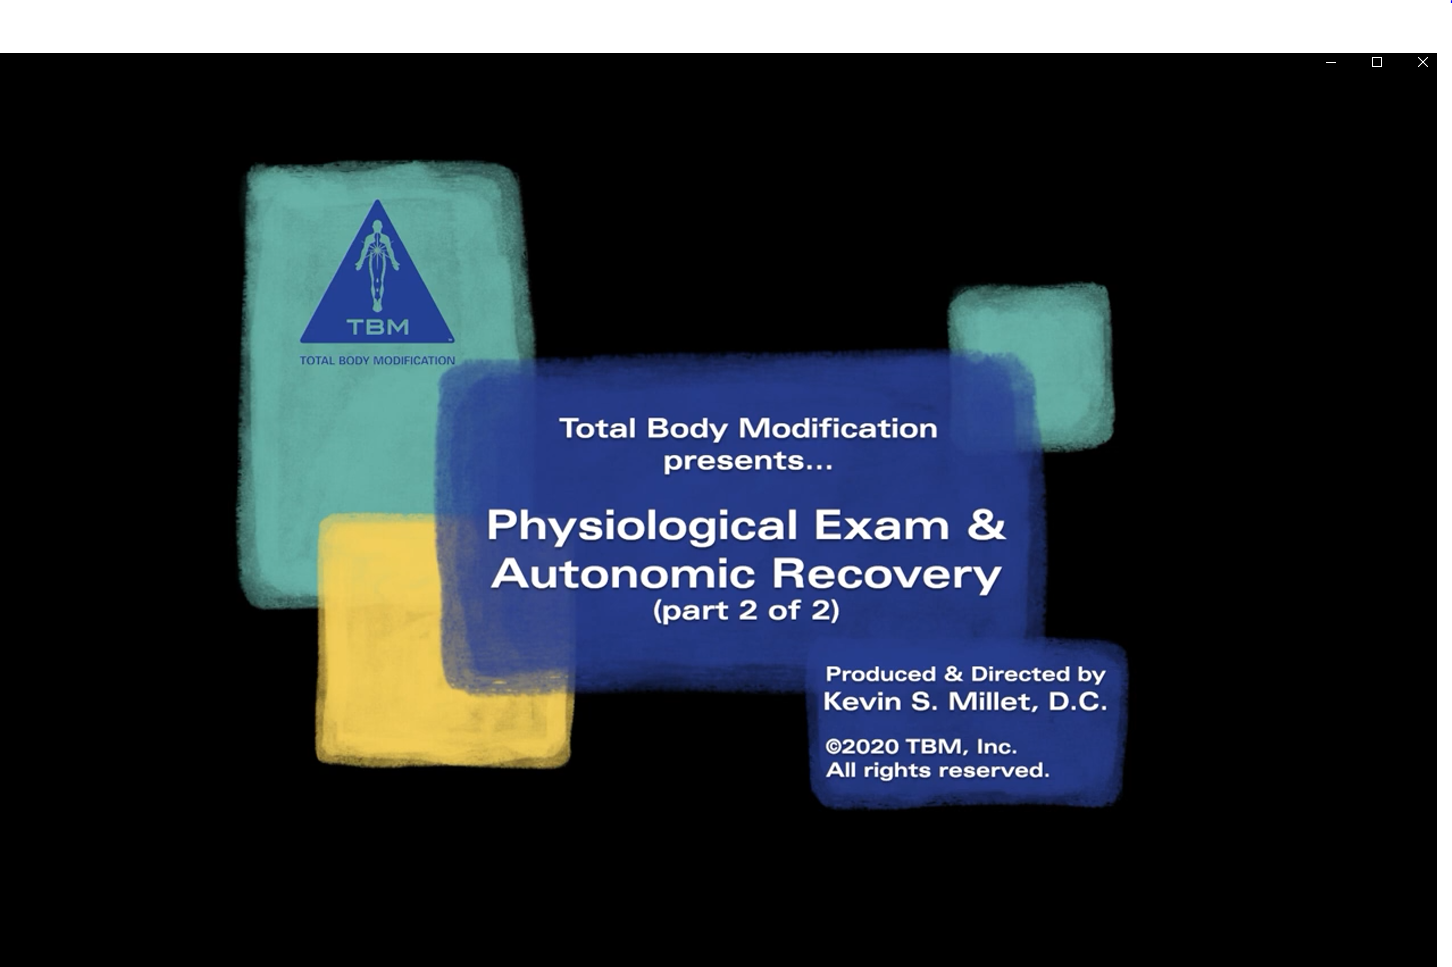 PA2 - Module 1 Part B: Physiologic Reset and Autonomic Recovery Part 2 - Online Training Course